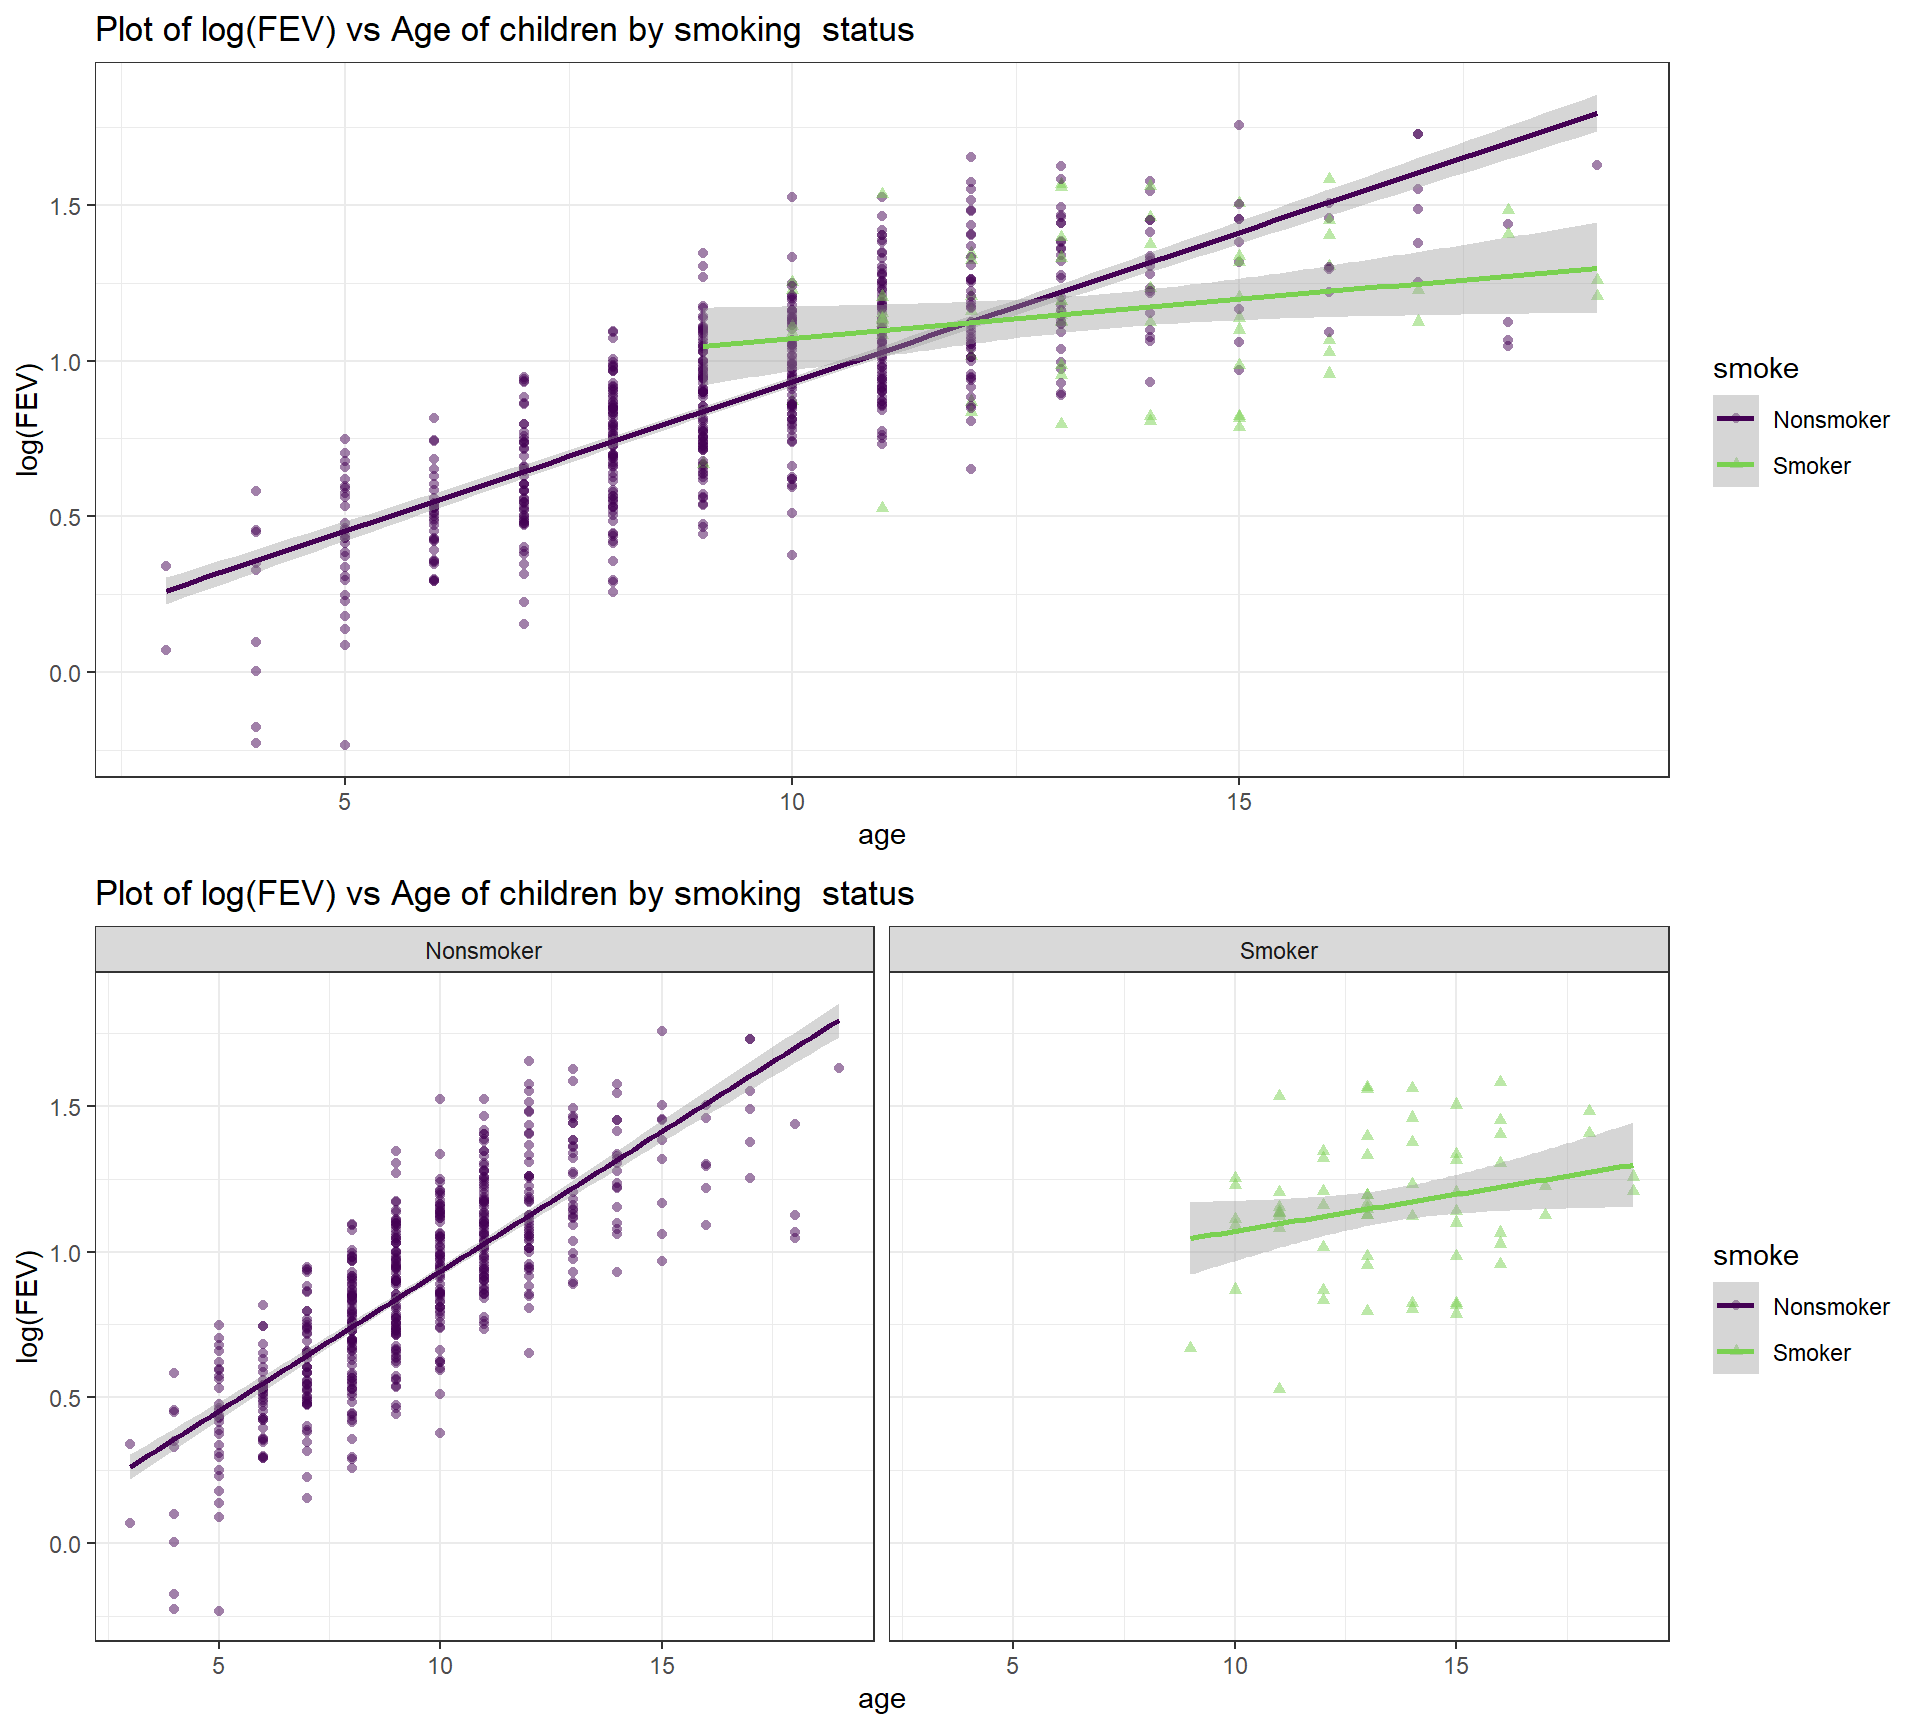 Scatterplot of log(FEV) vs Age by smoking status, with both combined (top) and faceted (bottom) versions.